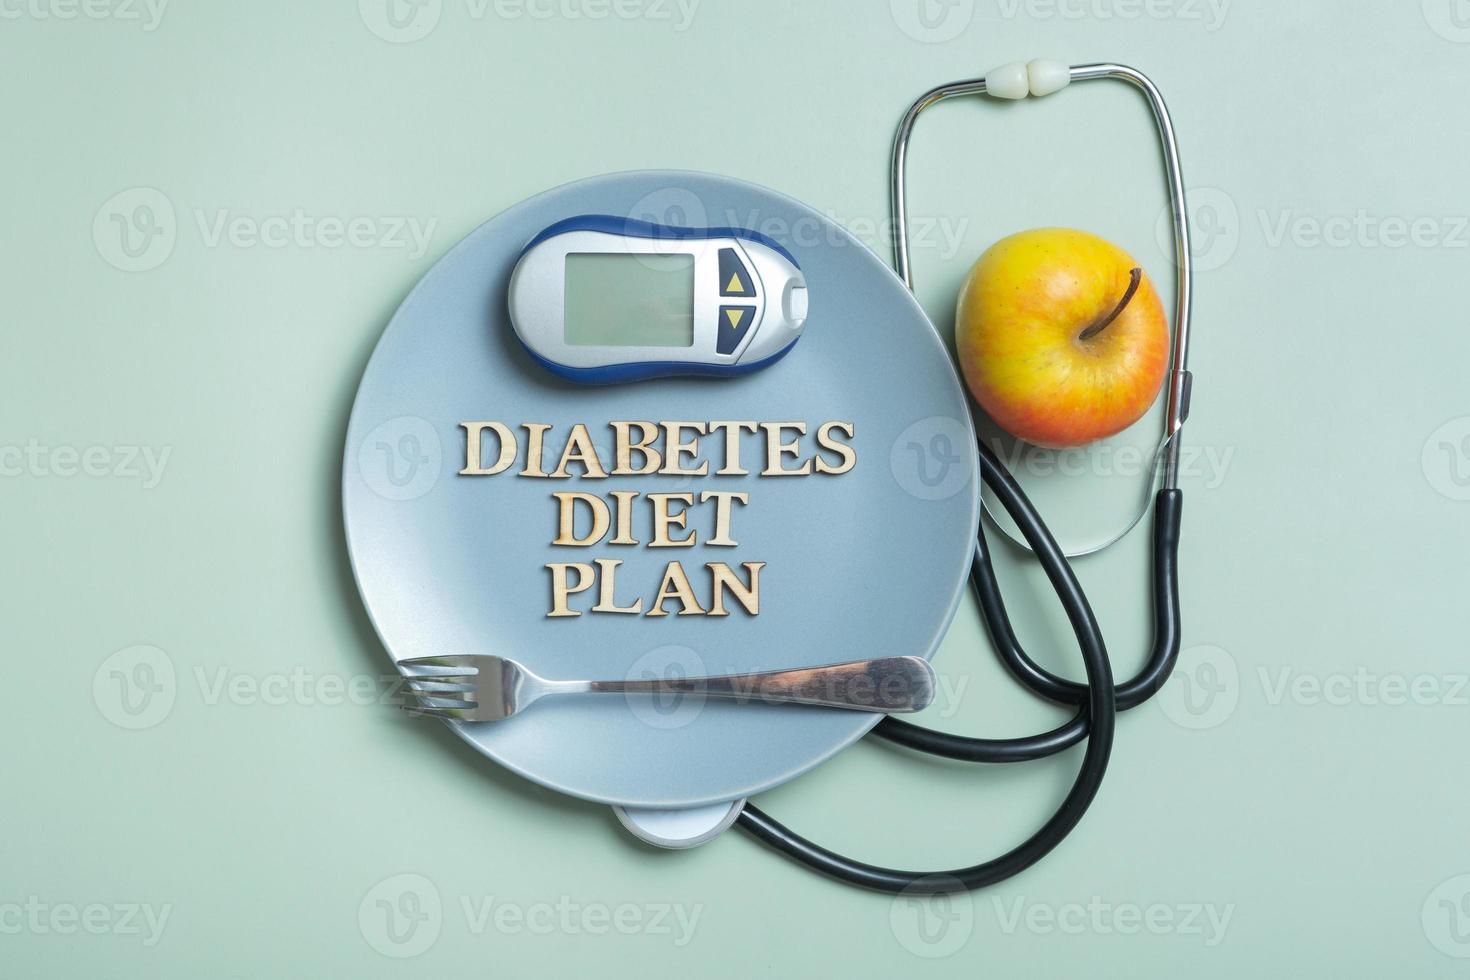 Diabetes Diet Plan text. Stethoscope, glucometer and plate on colored background flat lay, top view photo